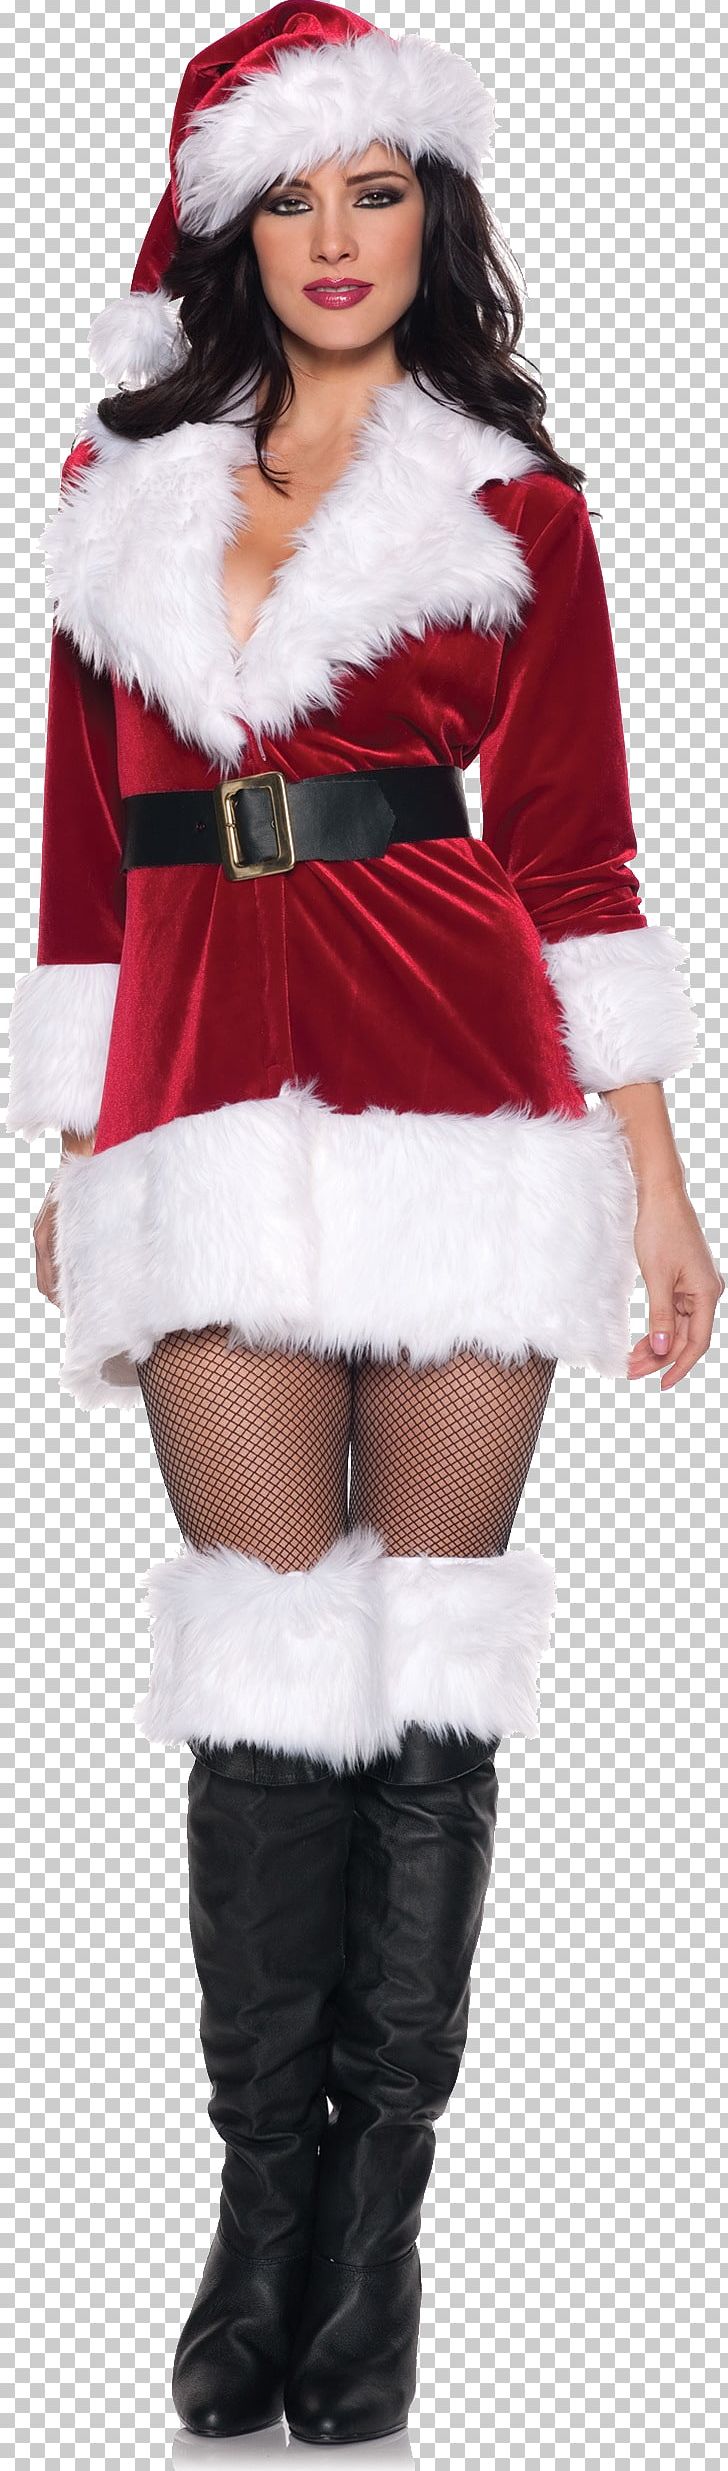 Mrs. Claus Santa Claus Santa Suit Costume Clothing PNG, Clipart, Belt, Christmas, Clothing, Clothing Sizes, Costume Free PNG Download